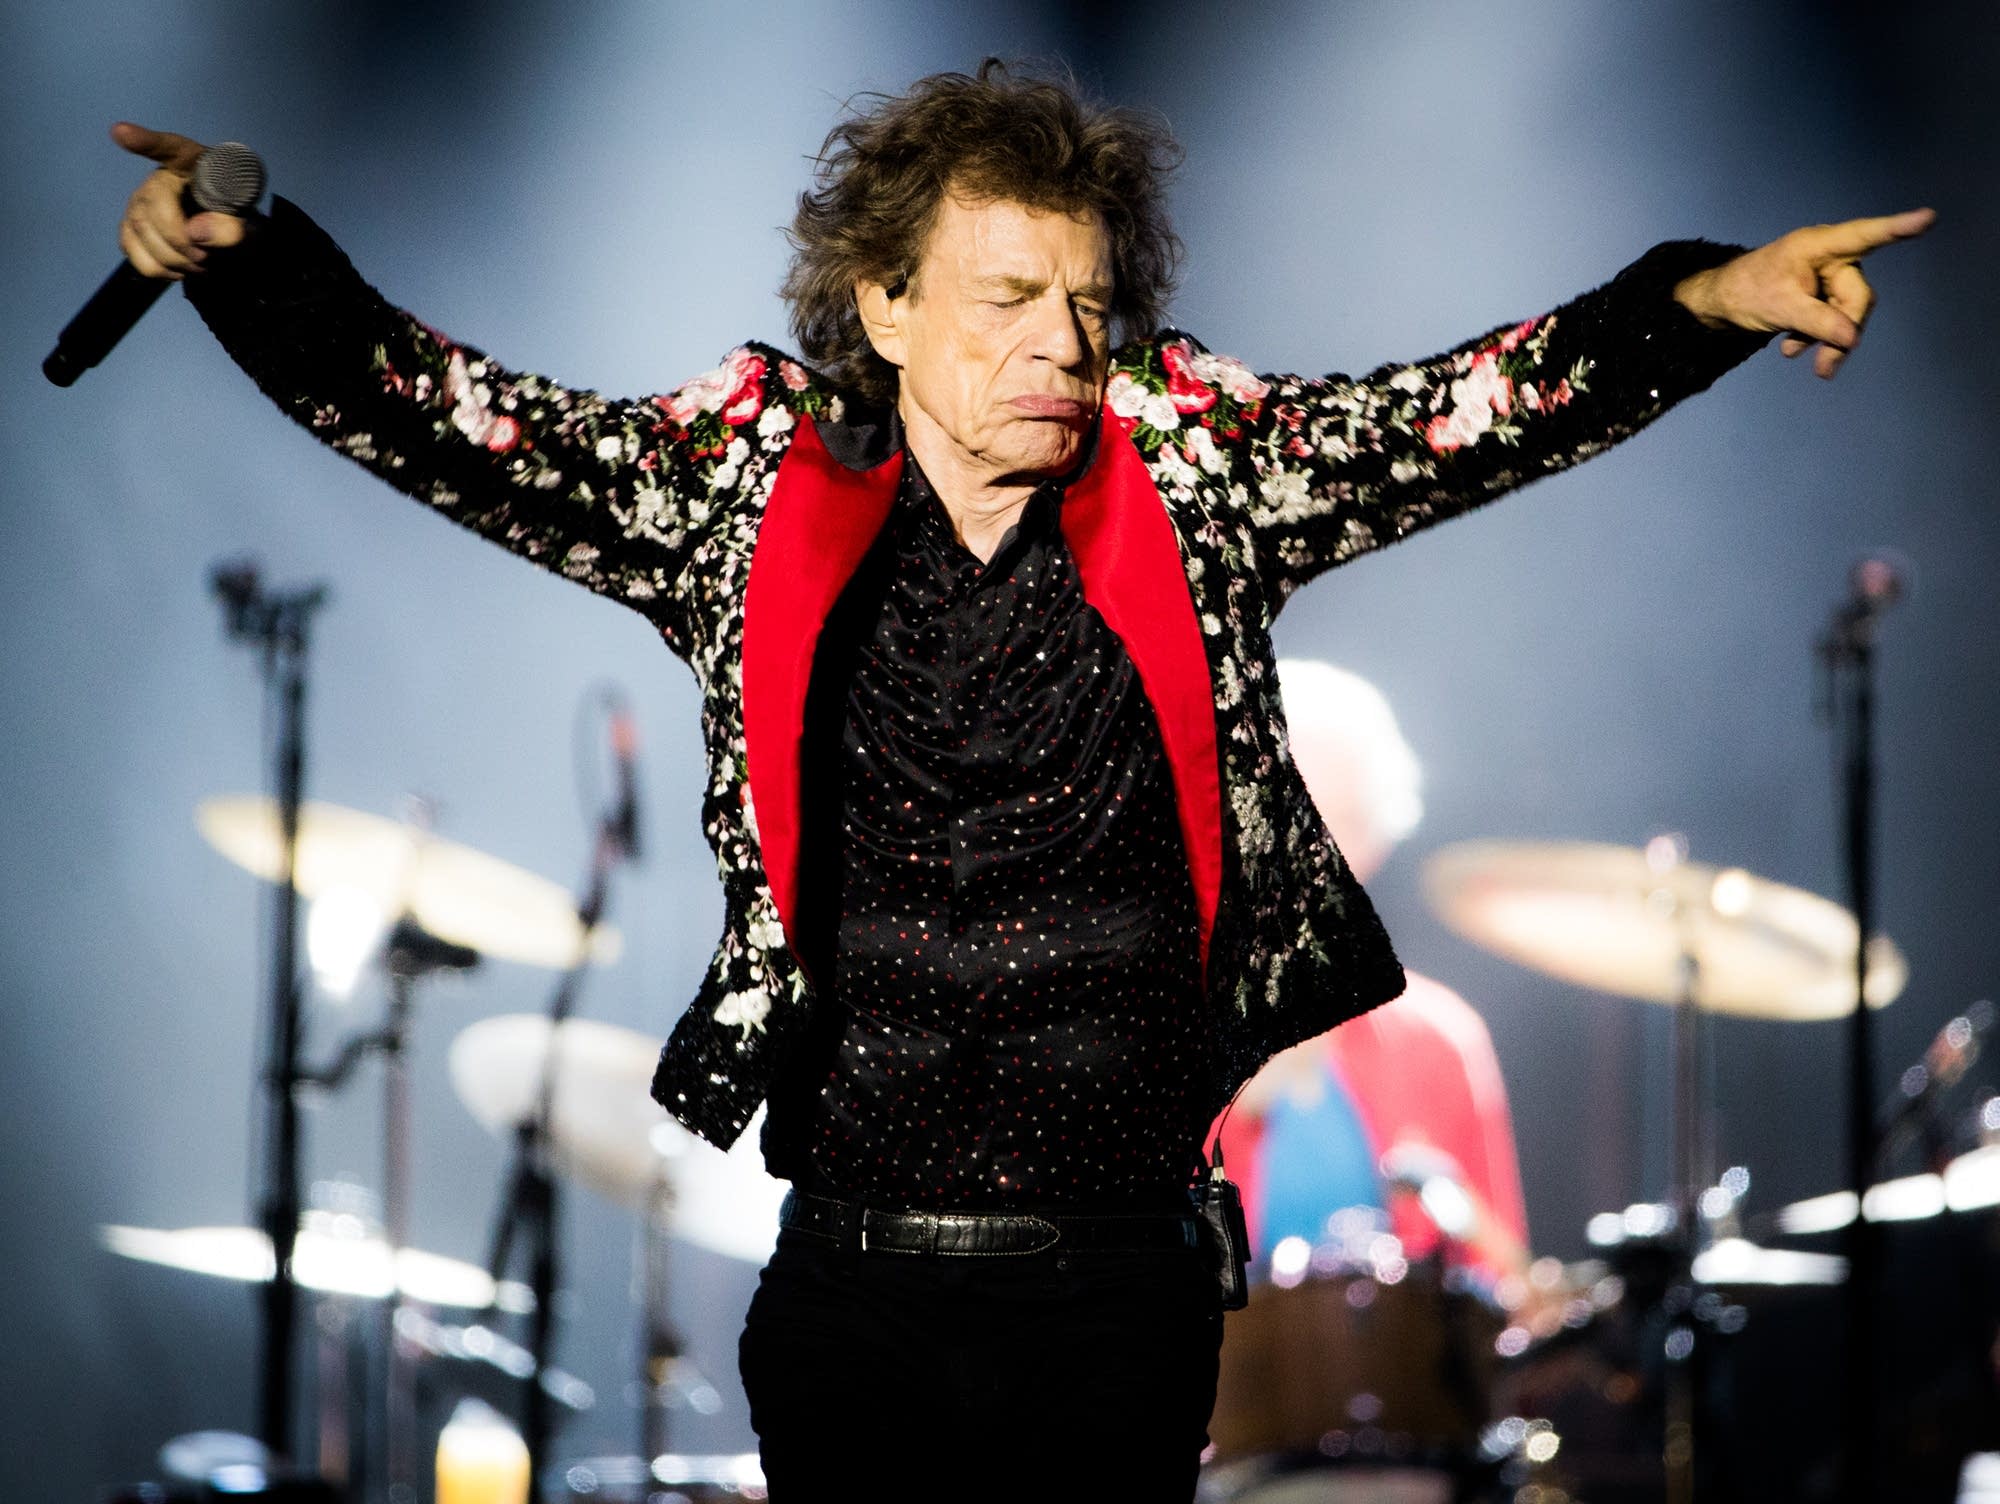 Mick Jagger performs with the Rolling Stones in Miami, 2019.RICH FURY/GETTY IMAGES